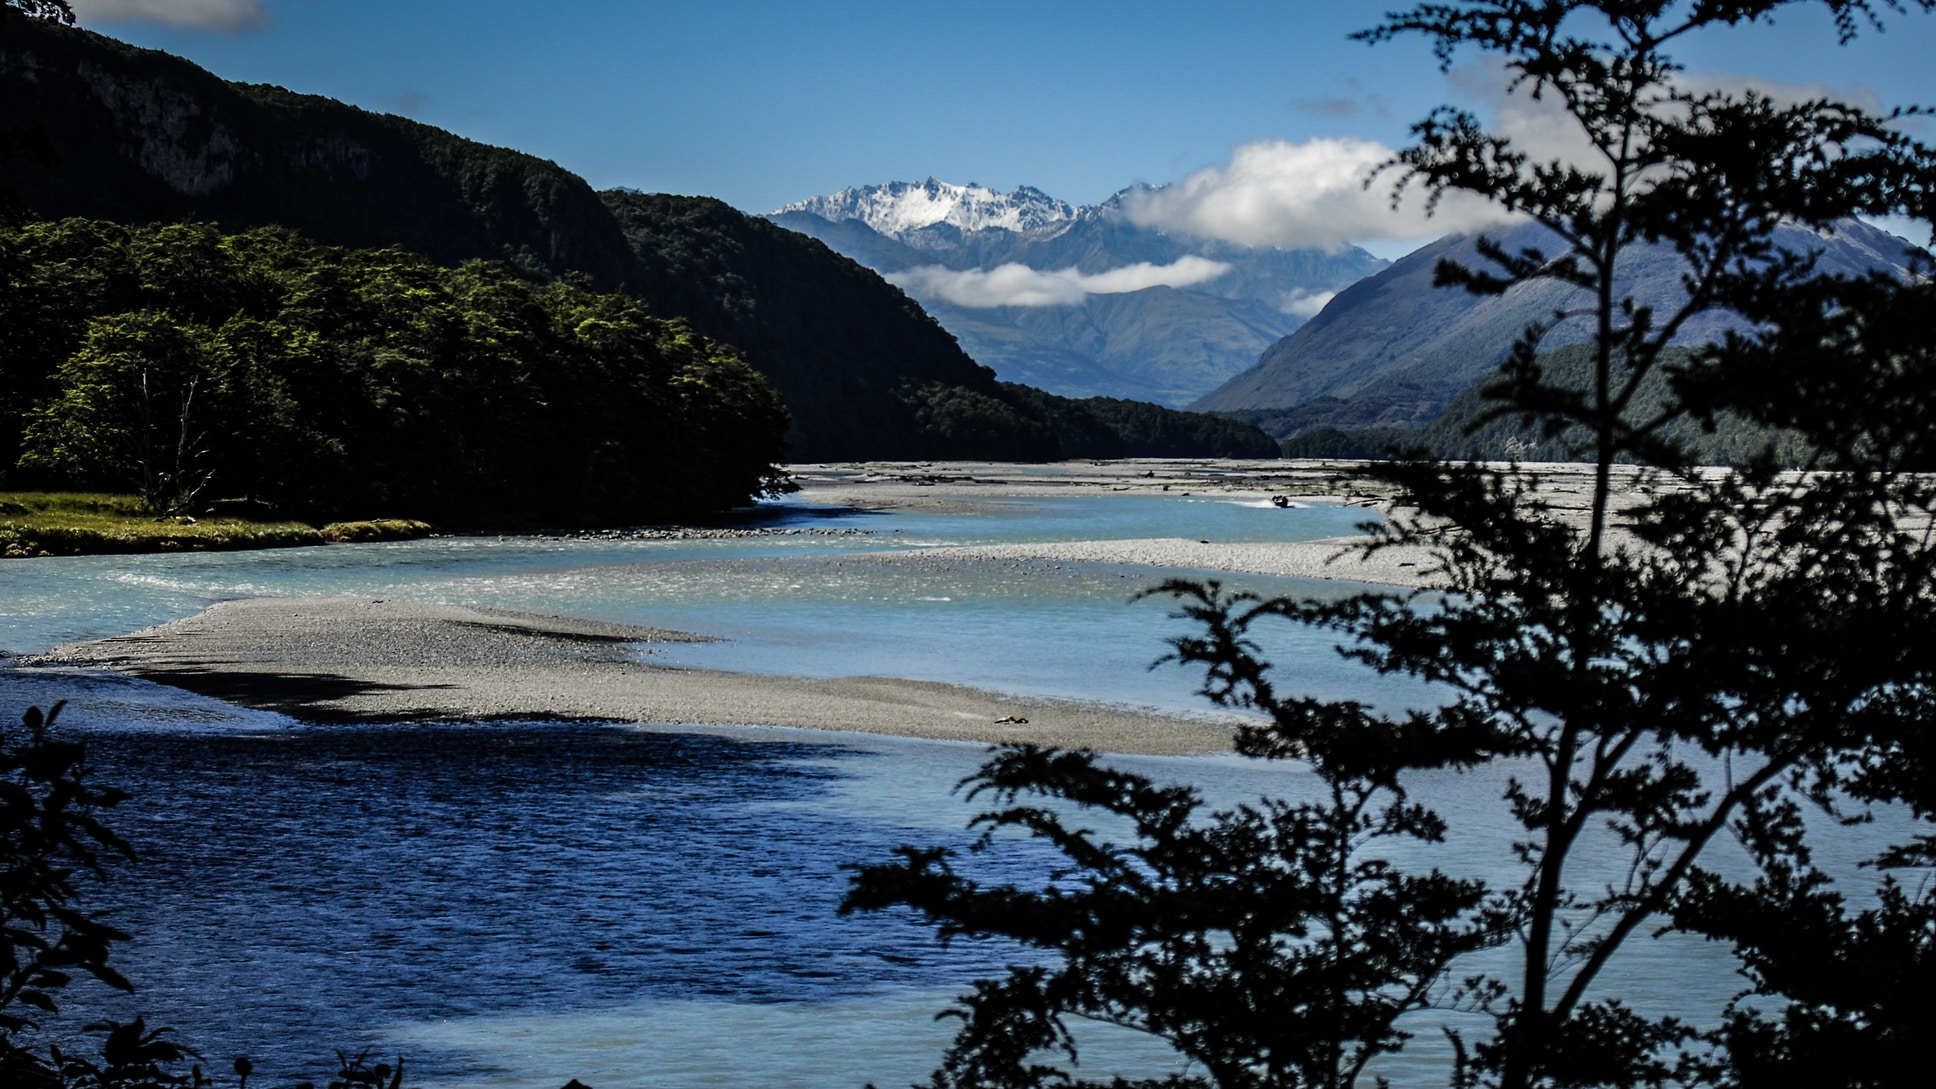 Private Tours	New Zealand Tours Private Tour Guide North Island South Island Tour Guide New Zealand Sights Guided Tour